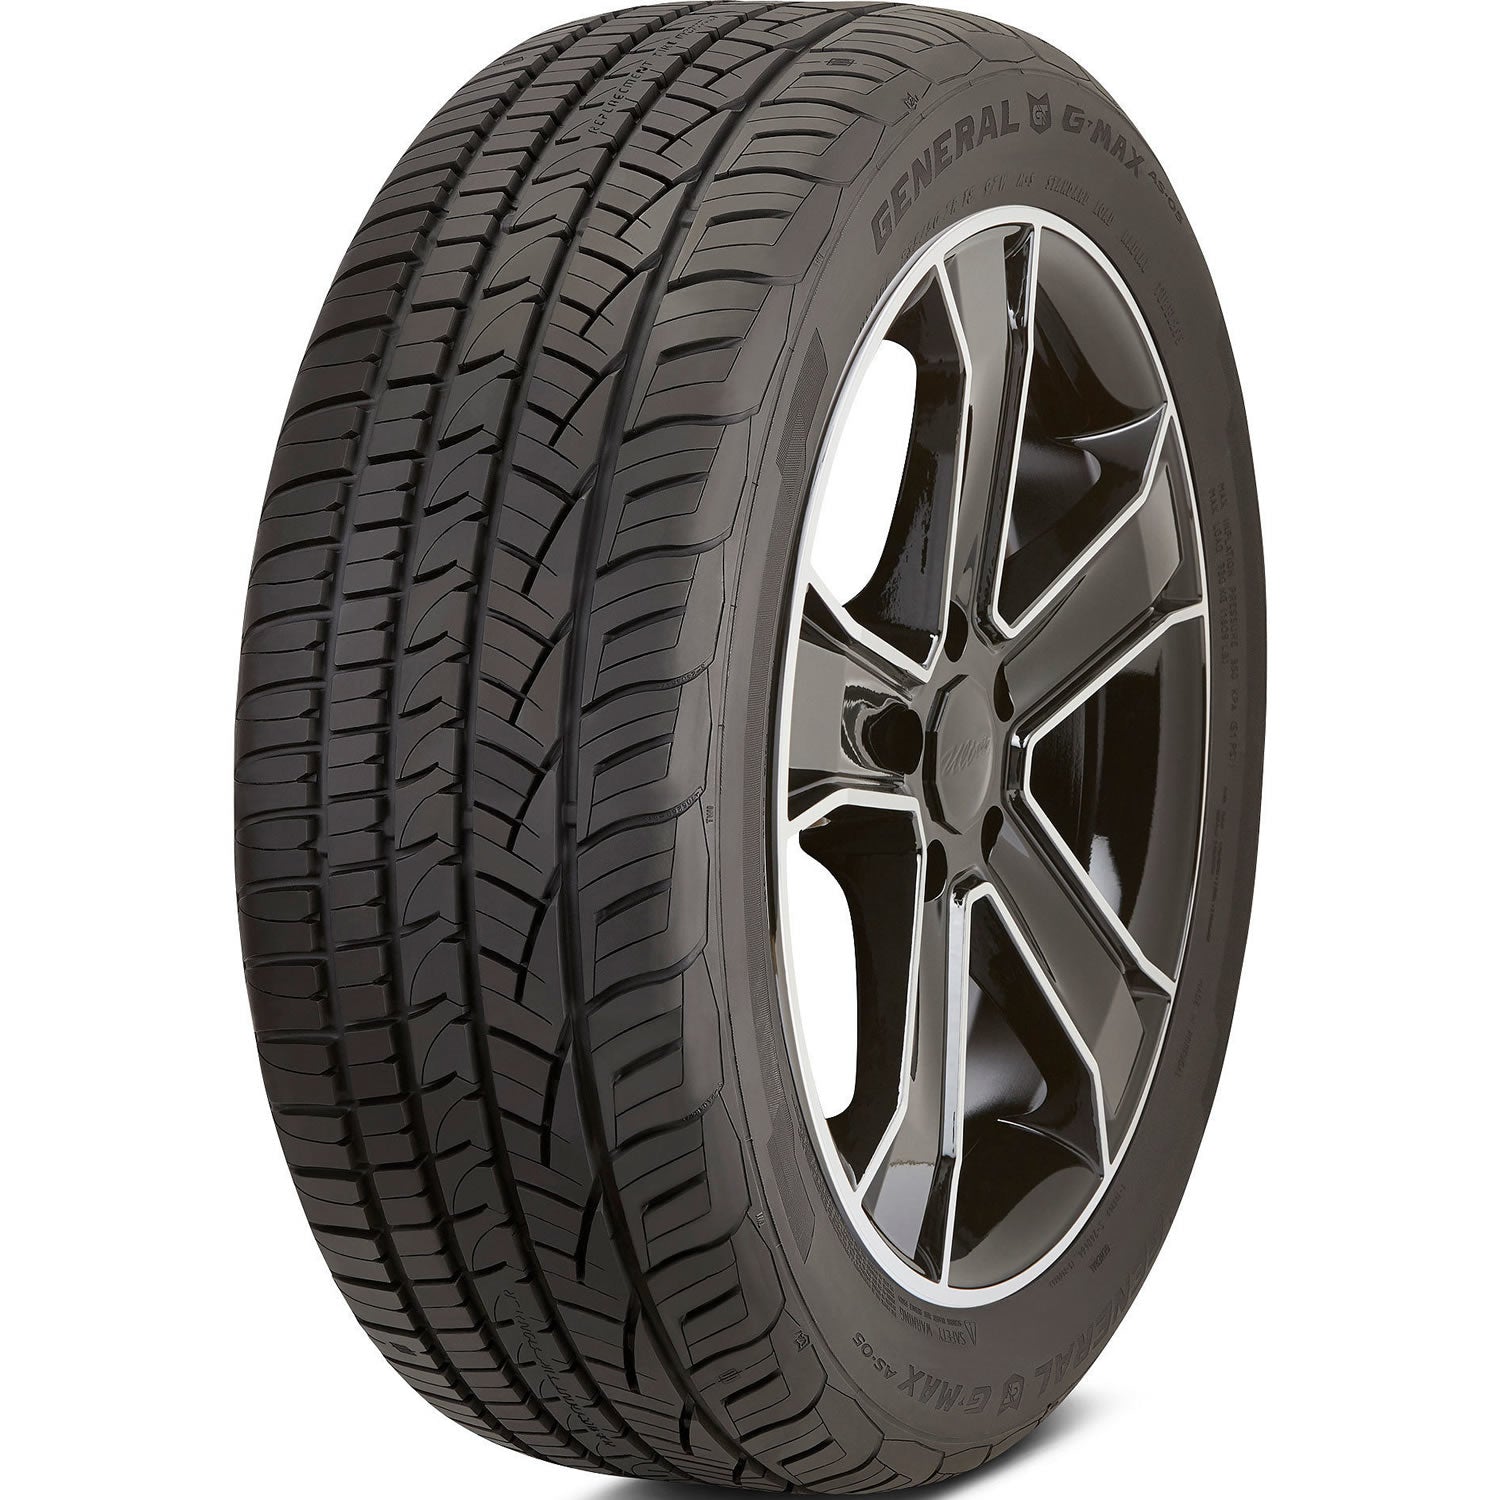 GENERAL G-MAX AS-05 245/55ZR18 (28.6X9.7R 18) Tires